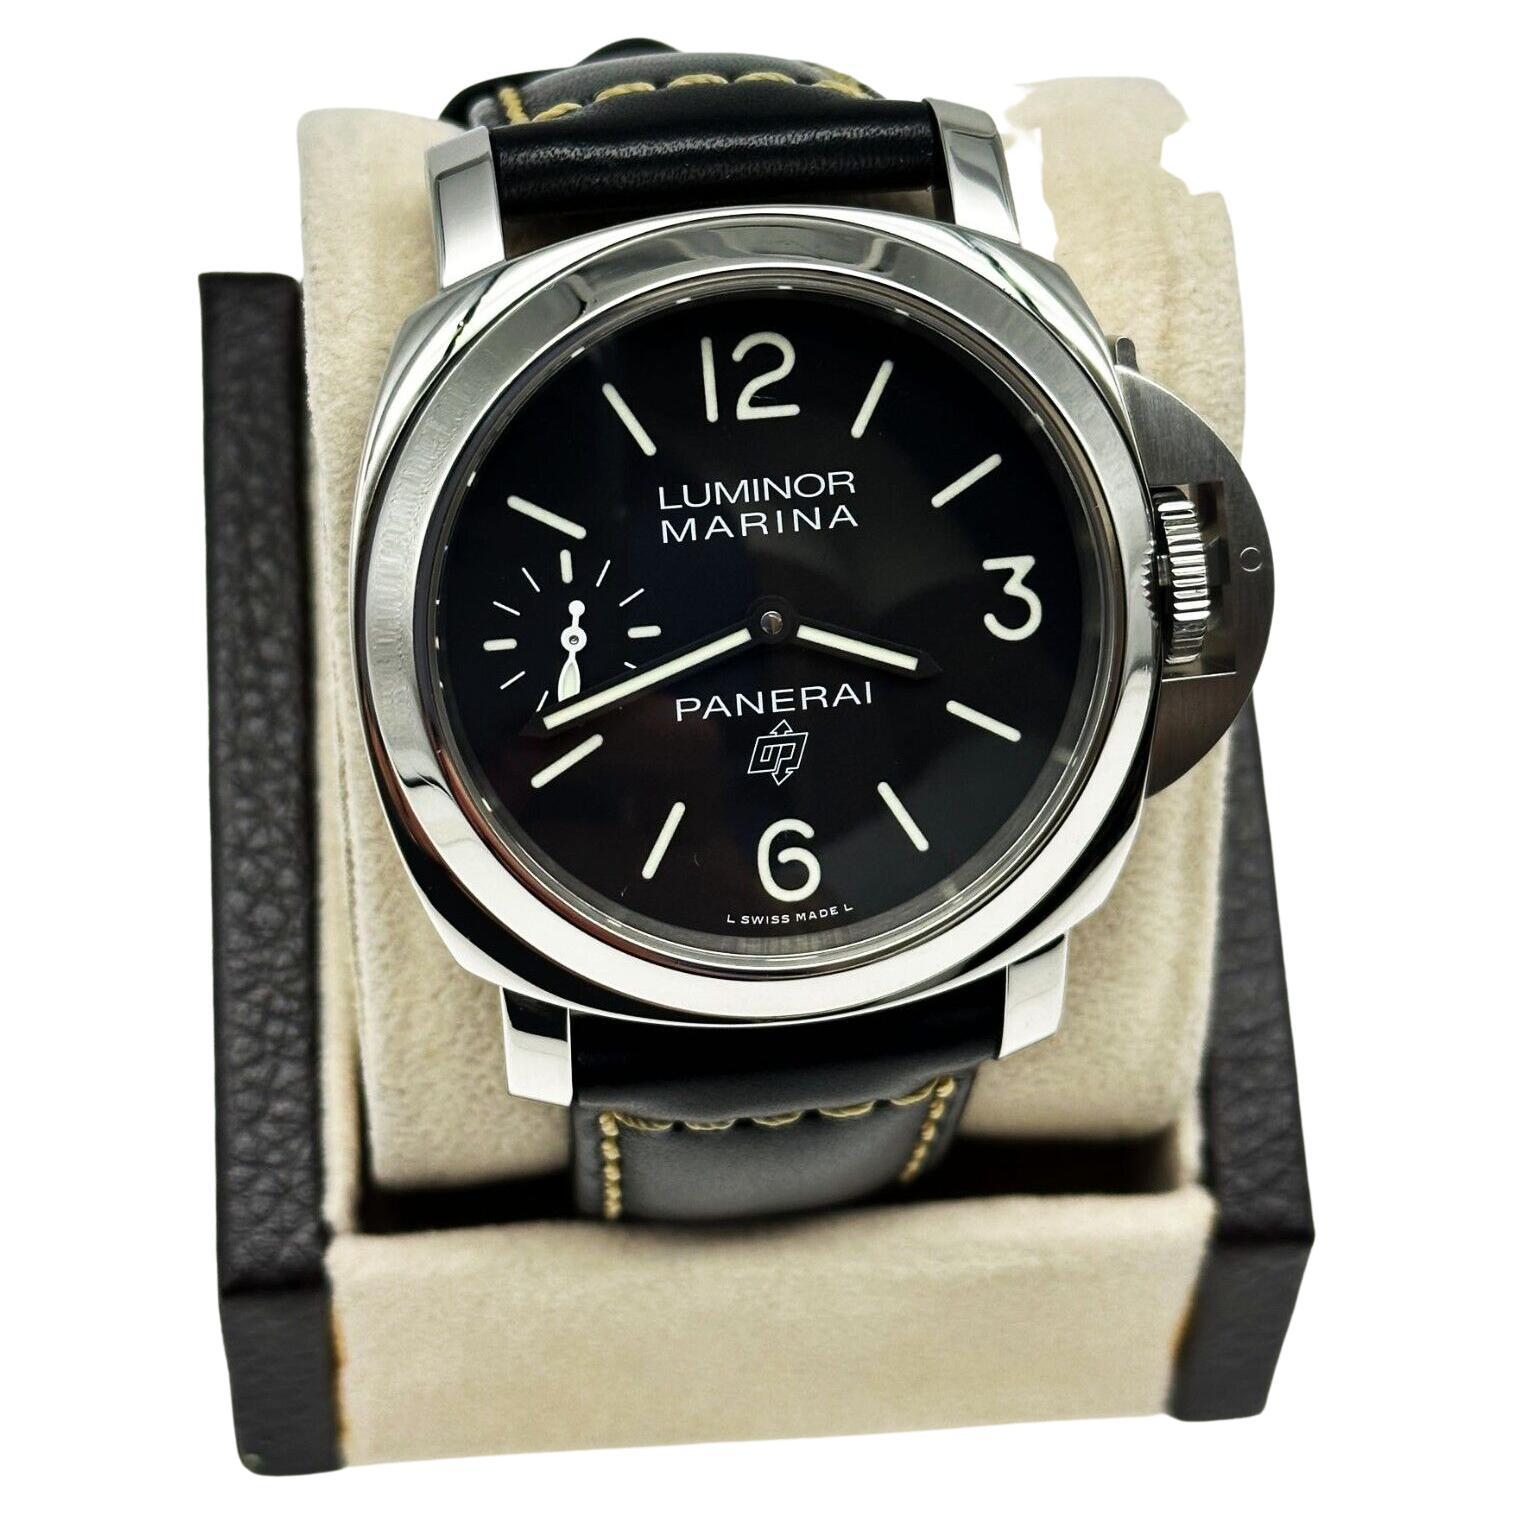 Why is Panerai so expensive?